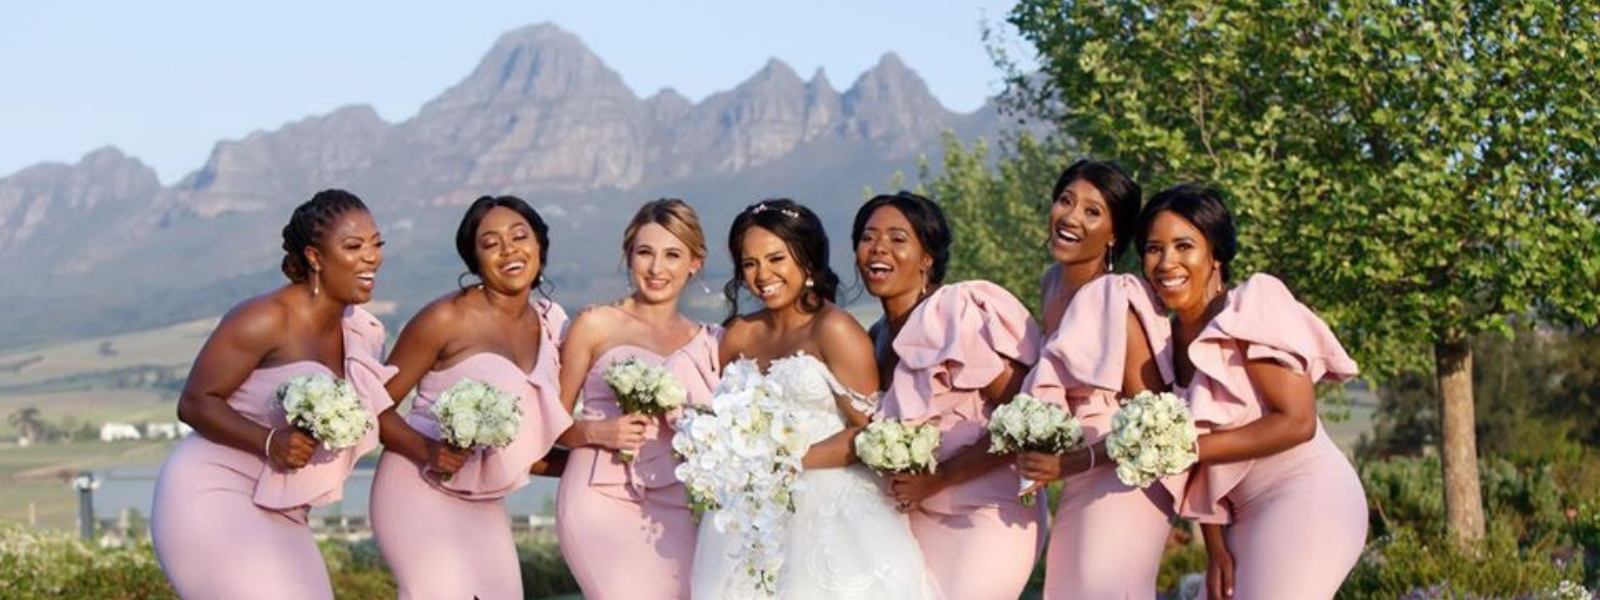 bridal bouquets, send flowers and chocolate, gift delivery south africa, African weddings